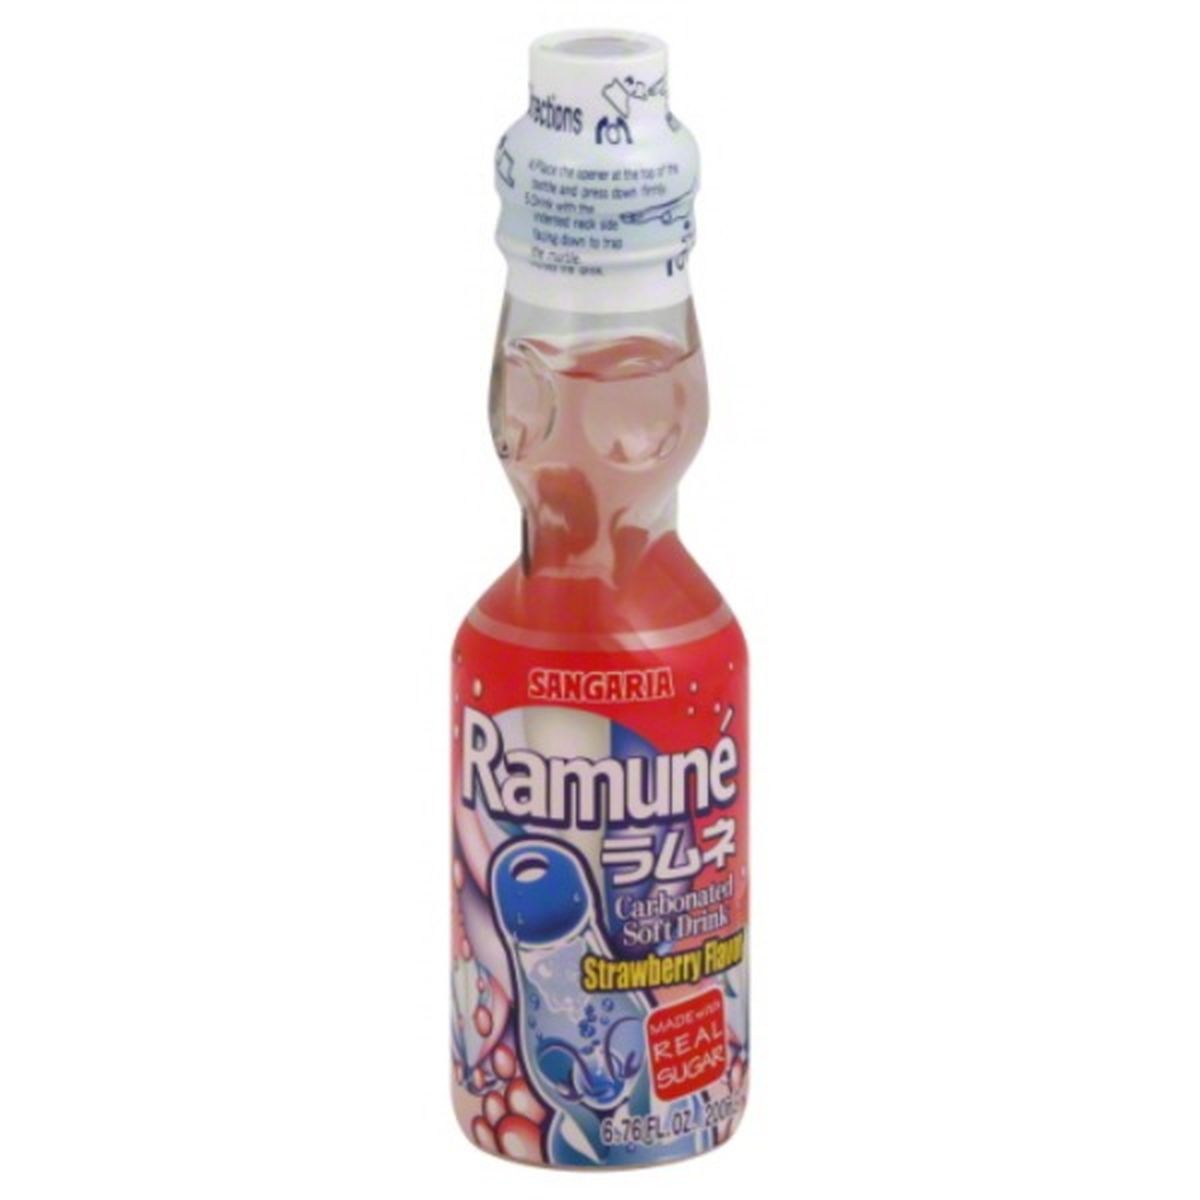 Calories in Sangaria Soft Drink, Carbonated, Ramune, Strawberry Flavor